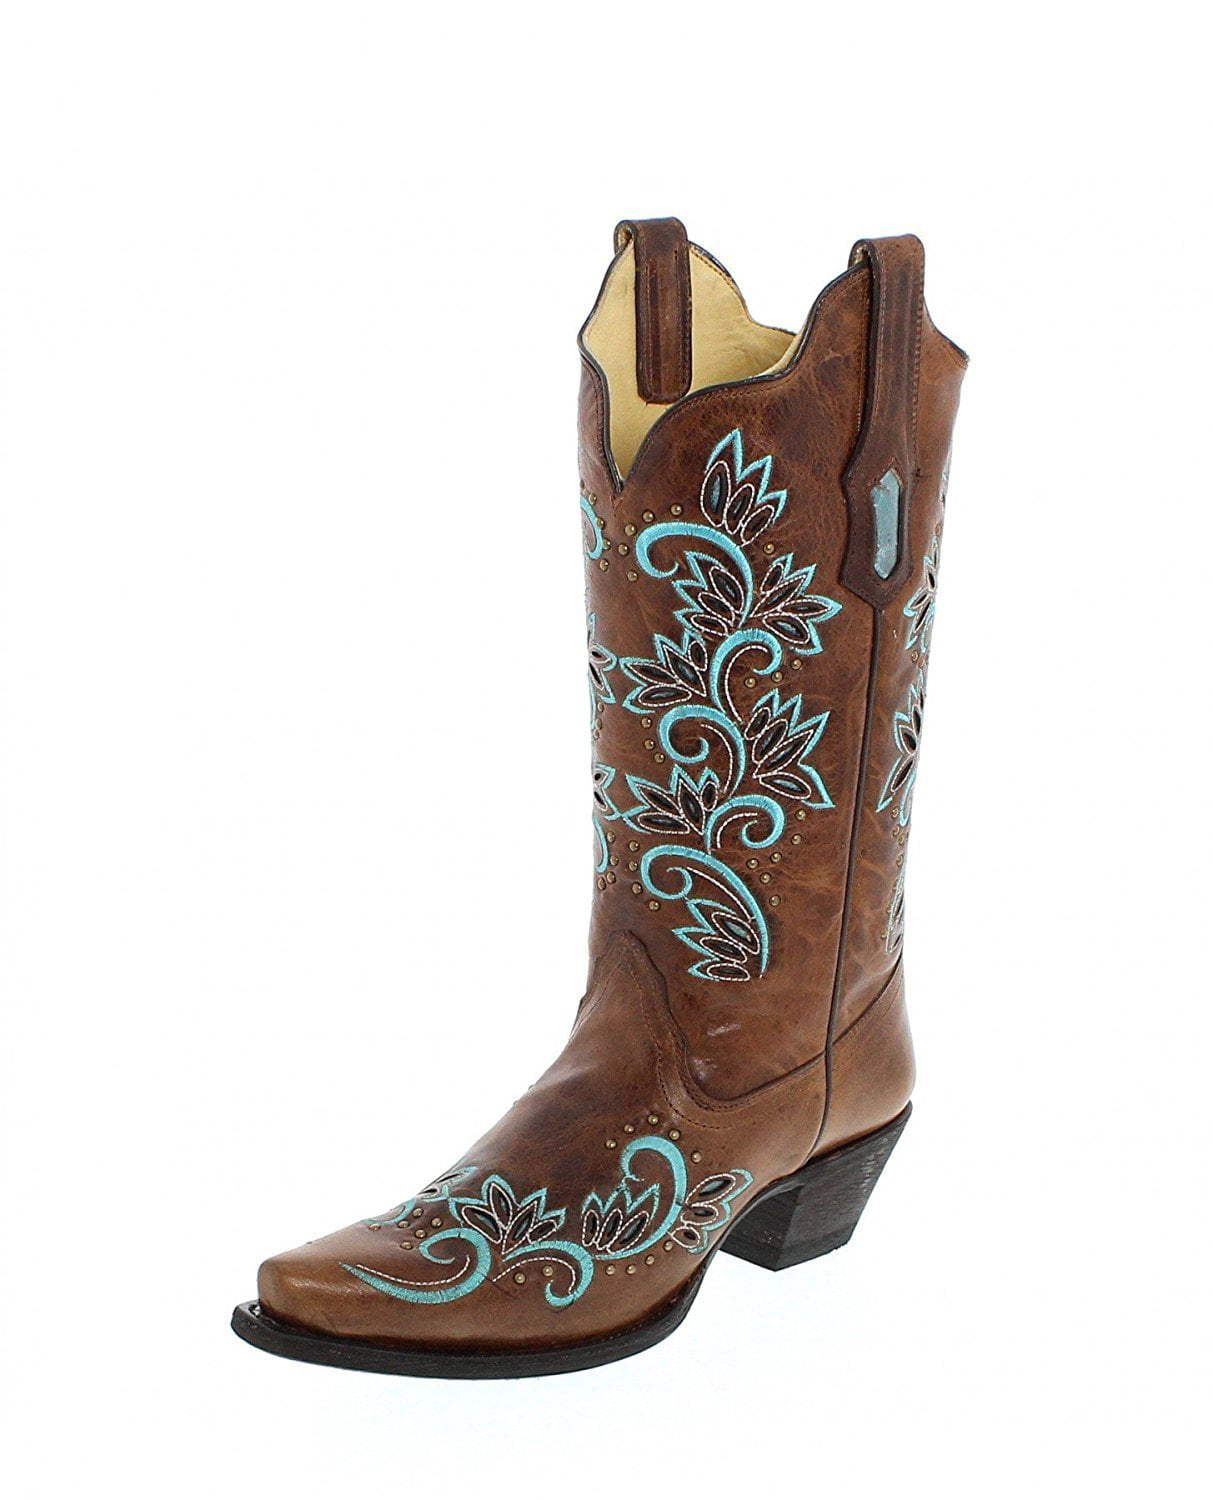 Womens New Stitched Leather Studded Cowgirl Western Boots Snip Toe Brown Pink Purple Turquoise Honey